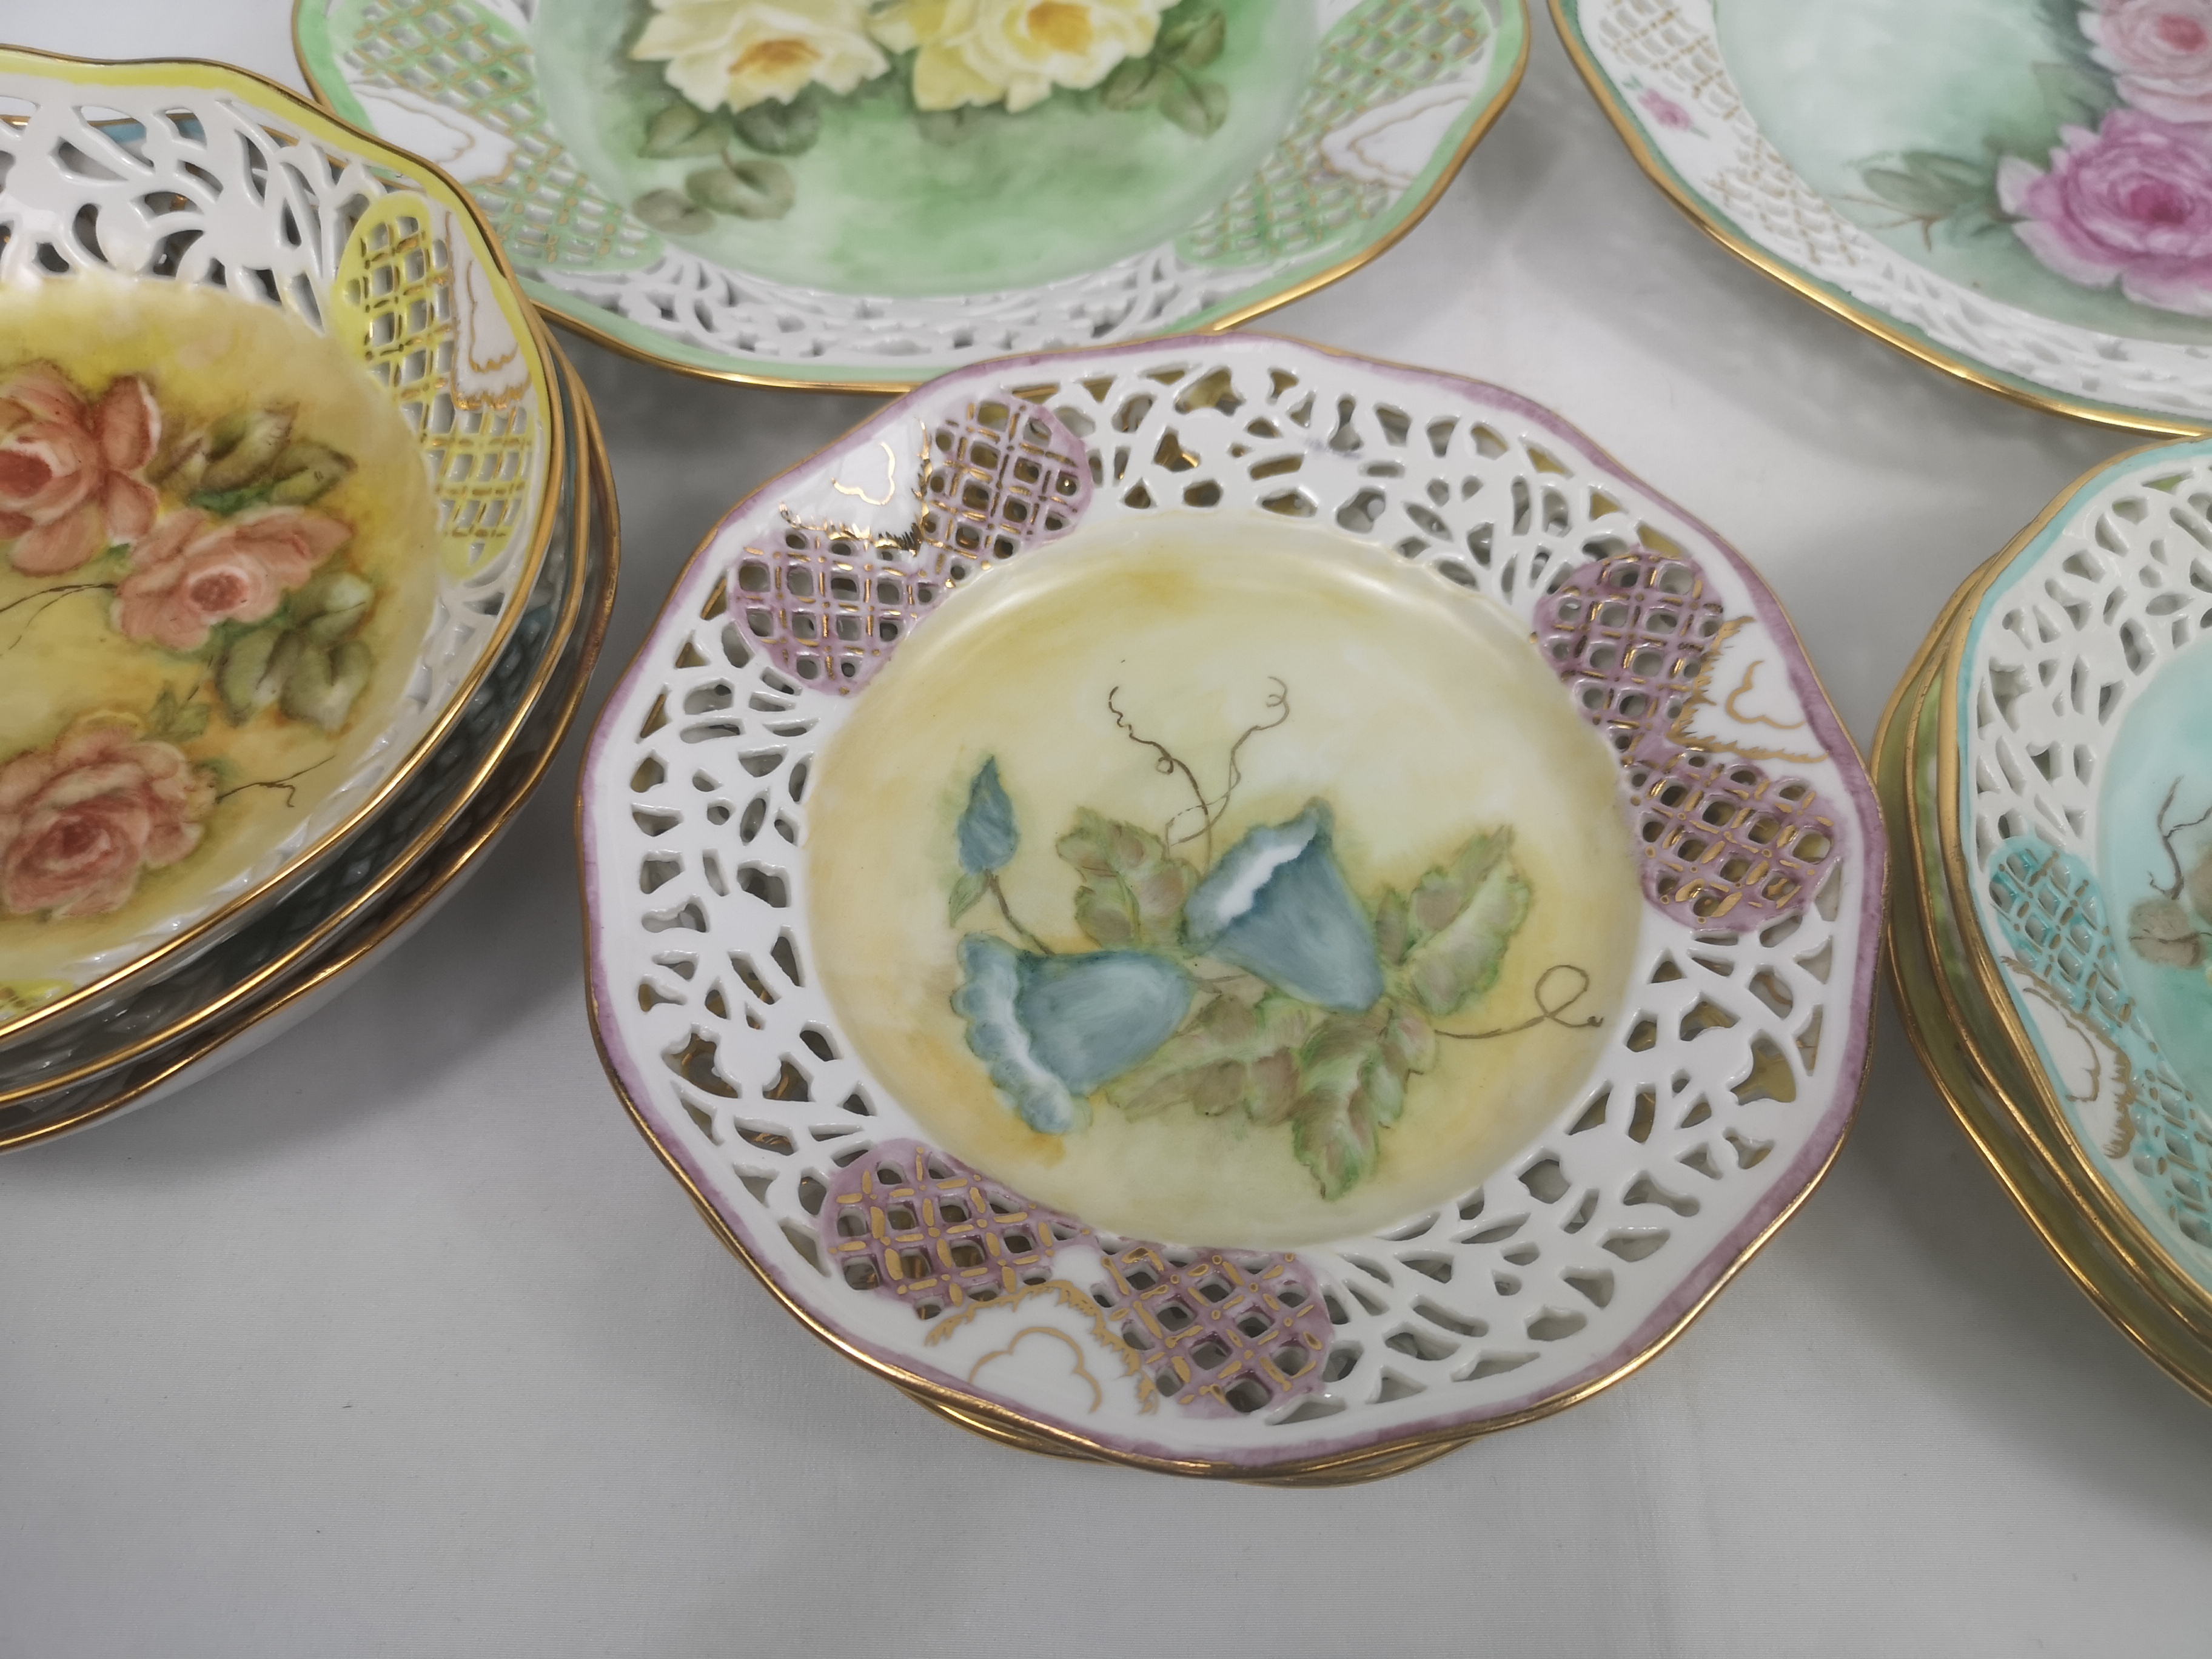 Quantity of hand painted plates and bowls by Marjorie Stevenson - Image 4 of 8